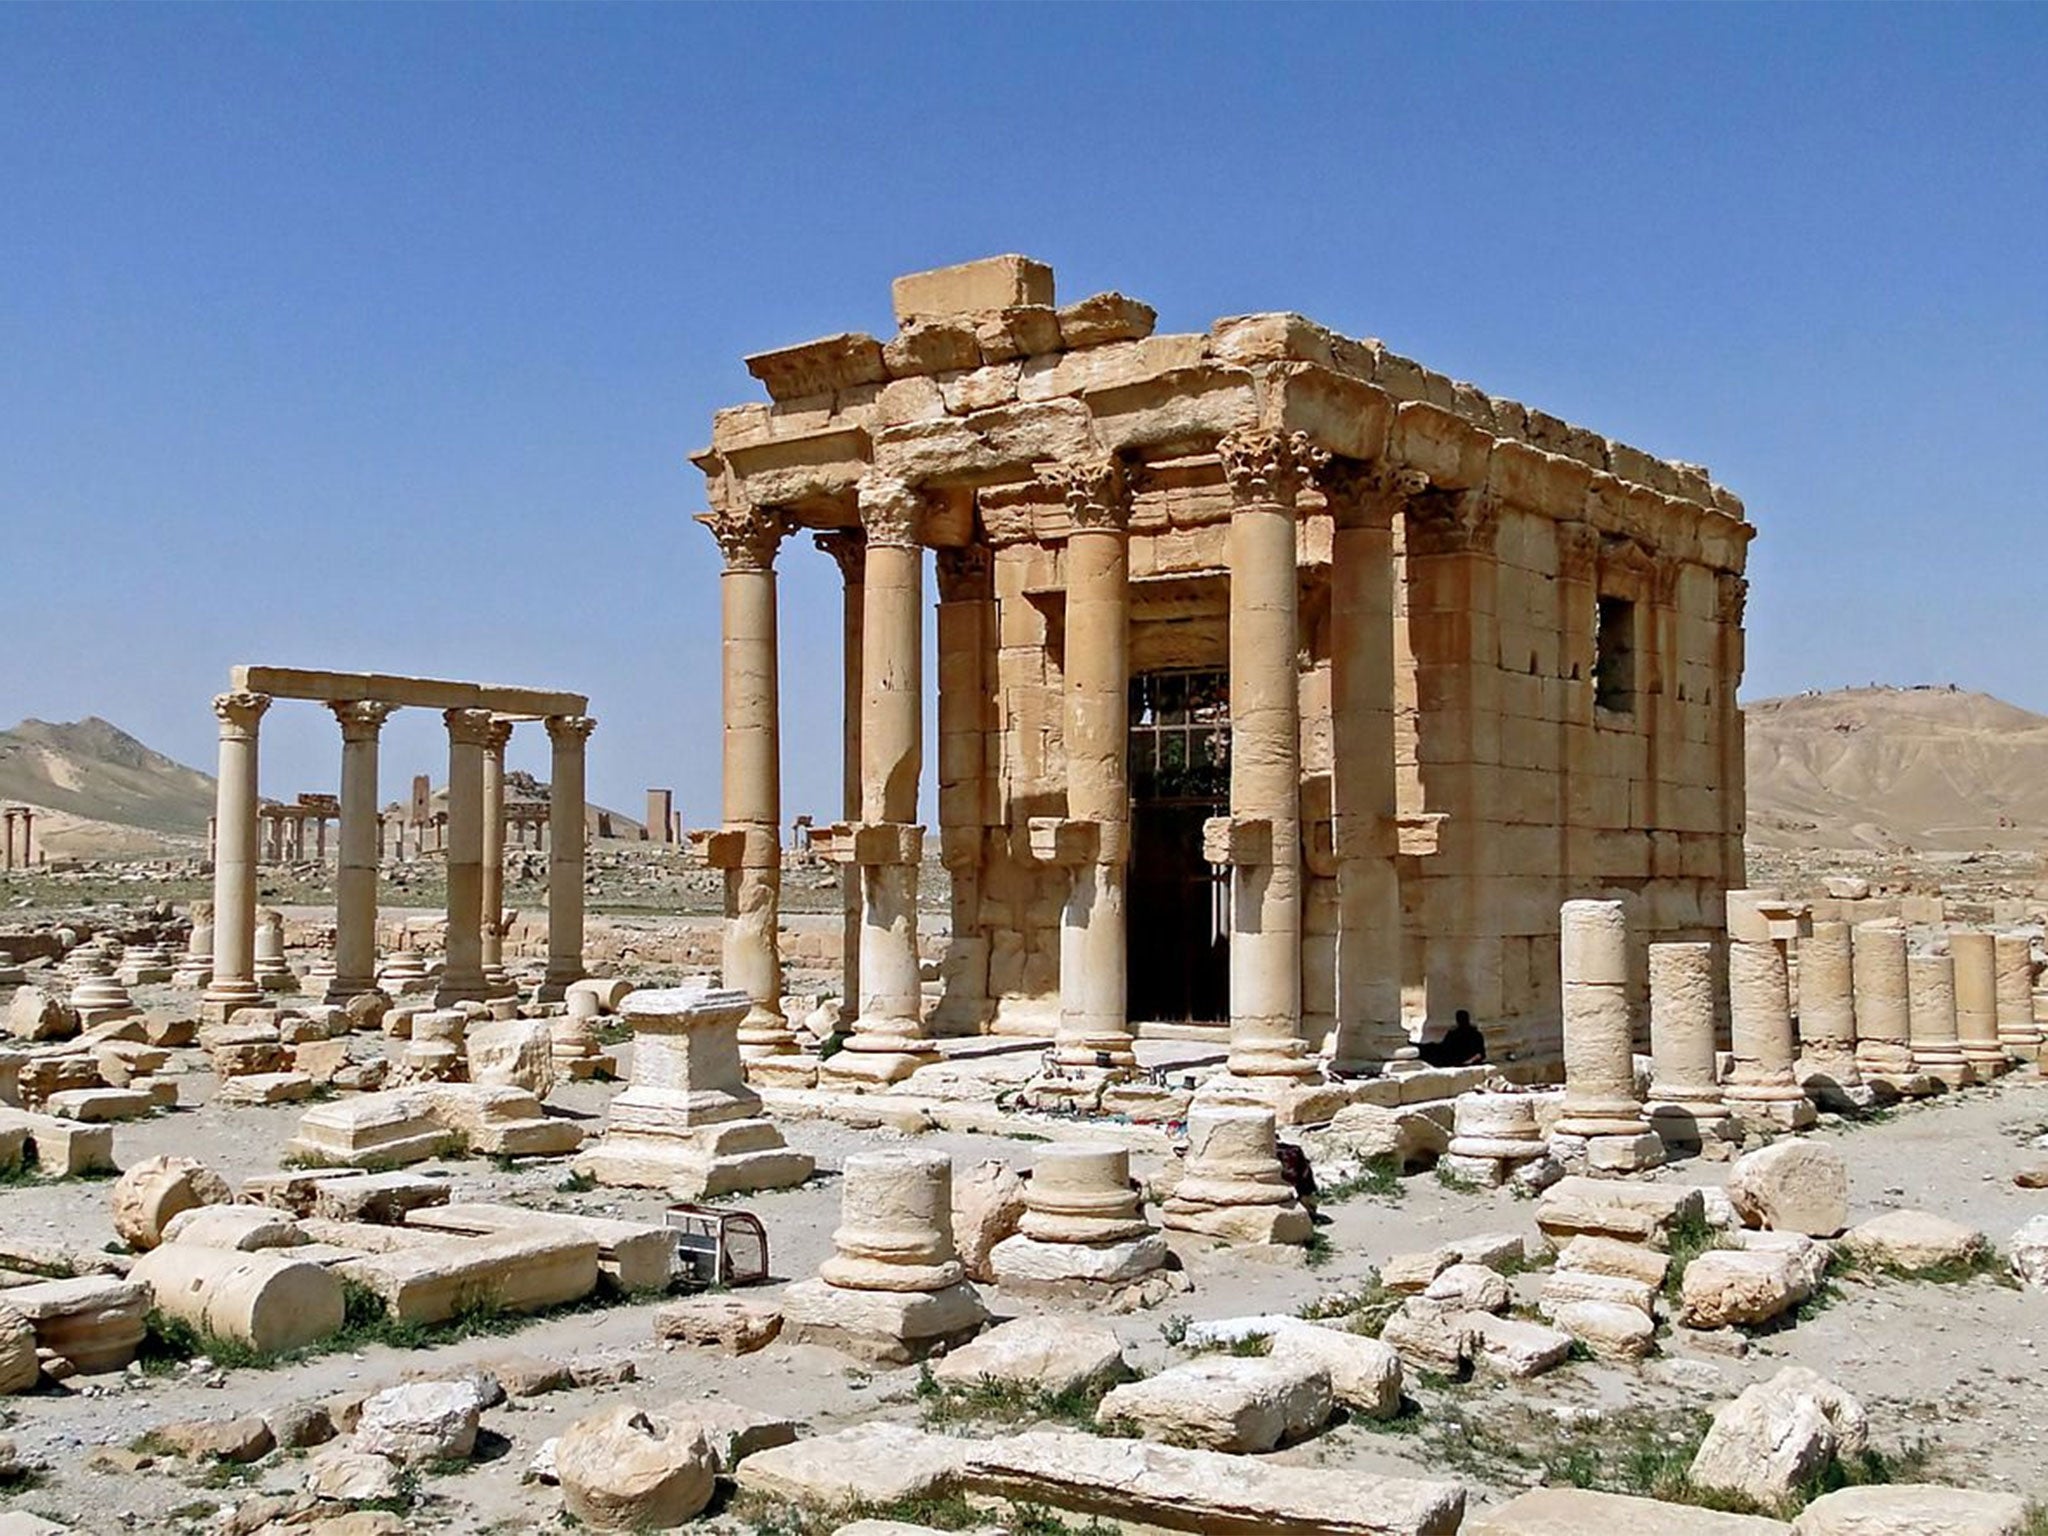 The ancient temple of Baalshamin, as it stood for 2,000 years (Picture c/o Bernard Gagnon)